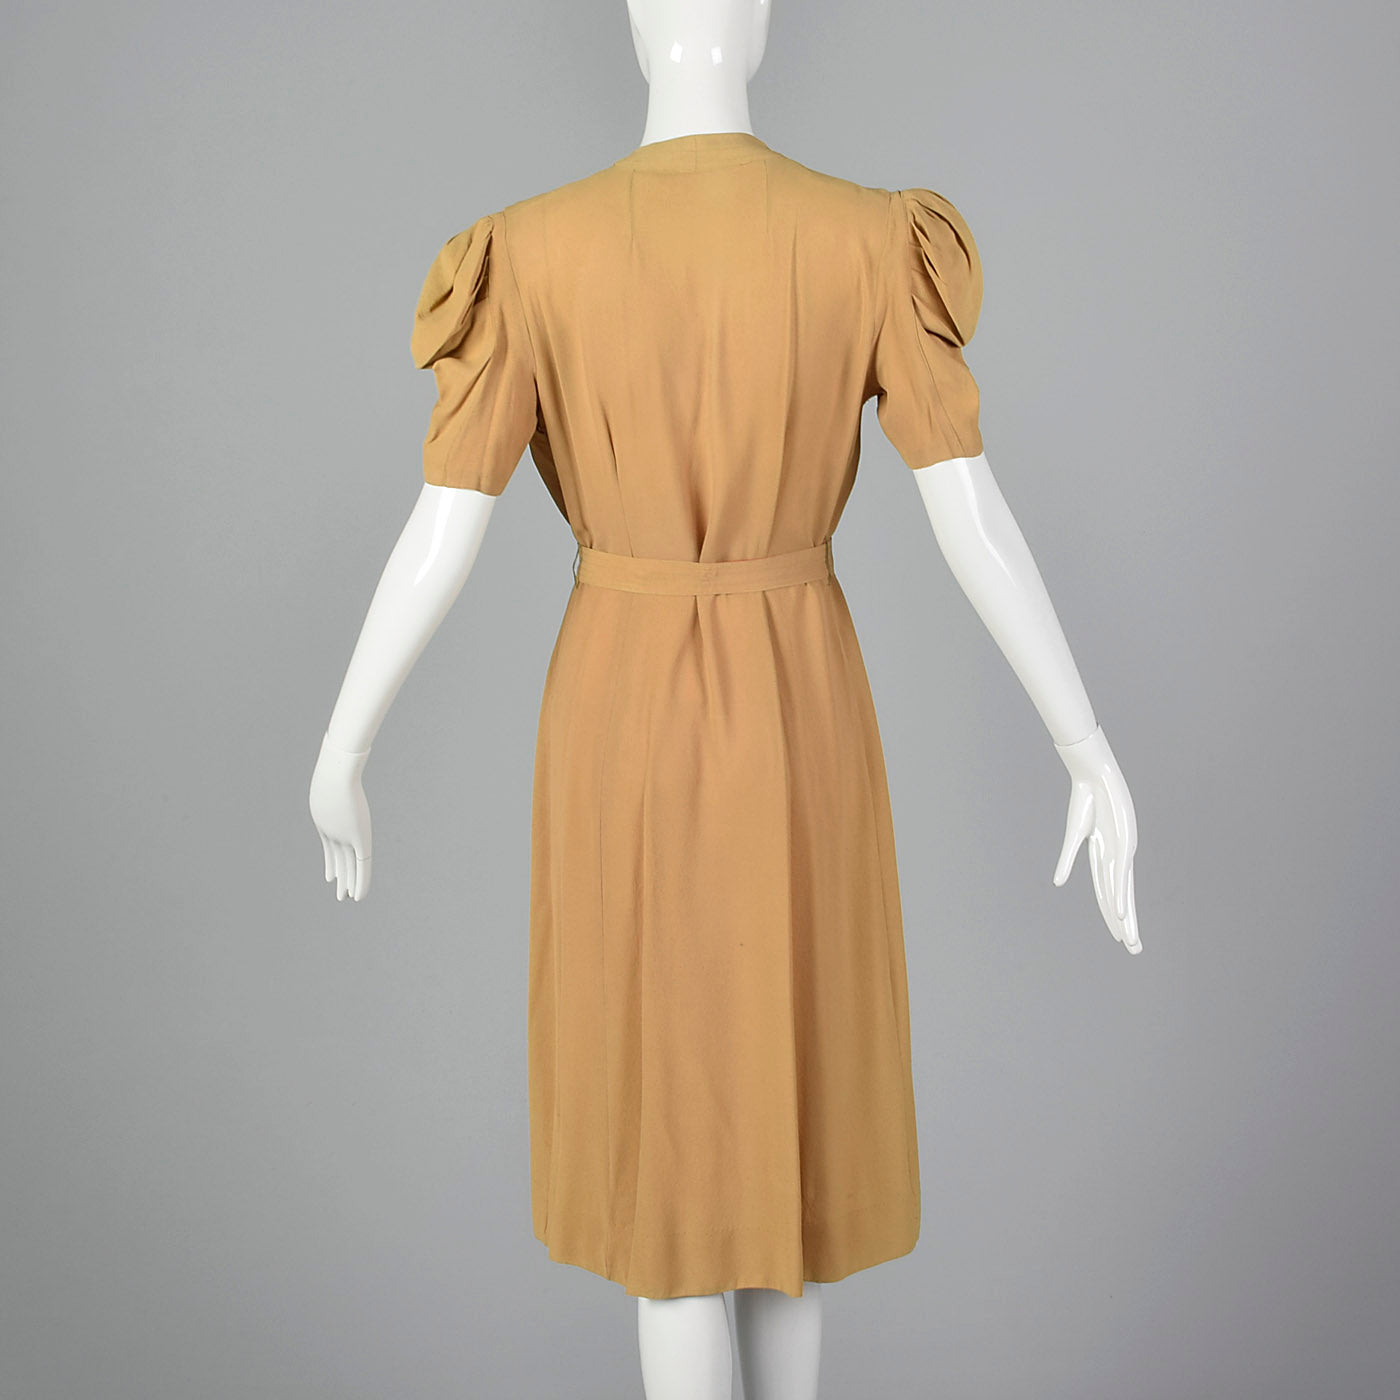 1940s Tan Rayon Crepe Dress with Full Flower Corsage